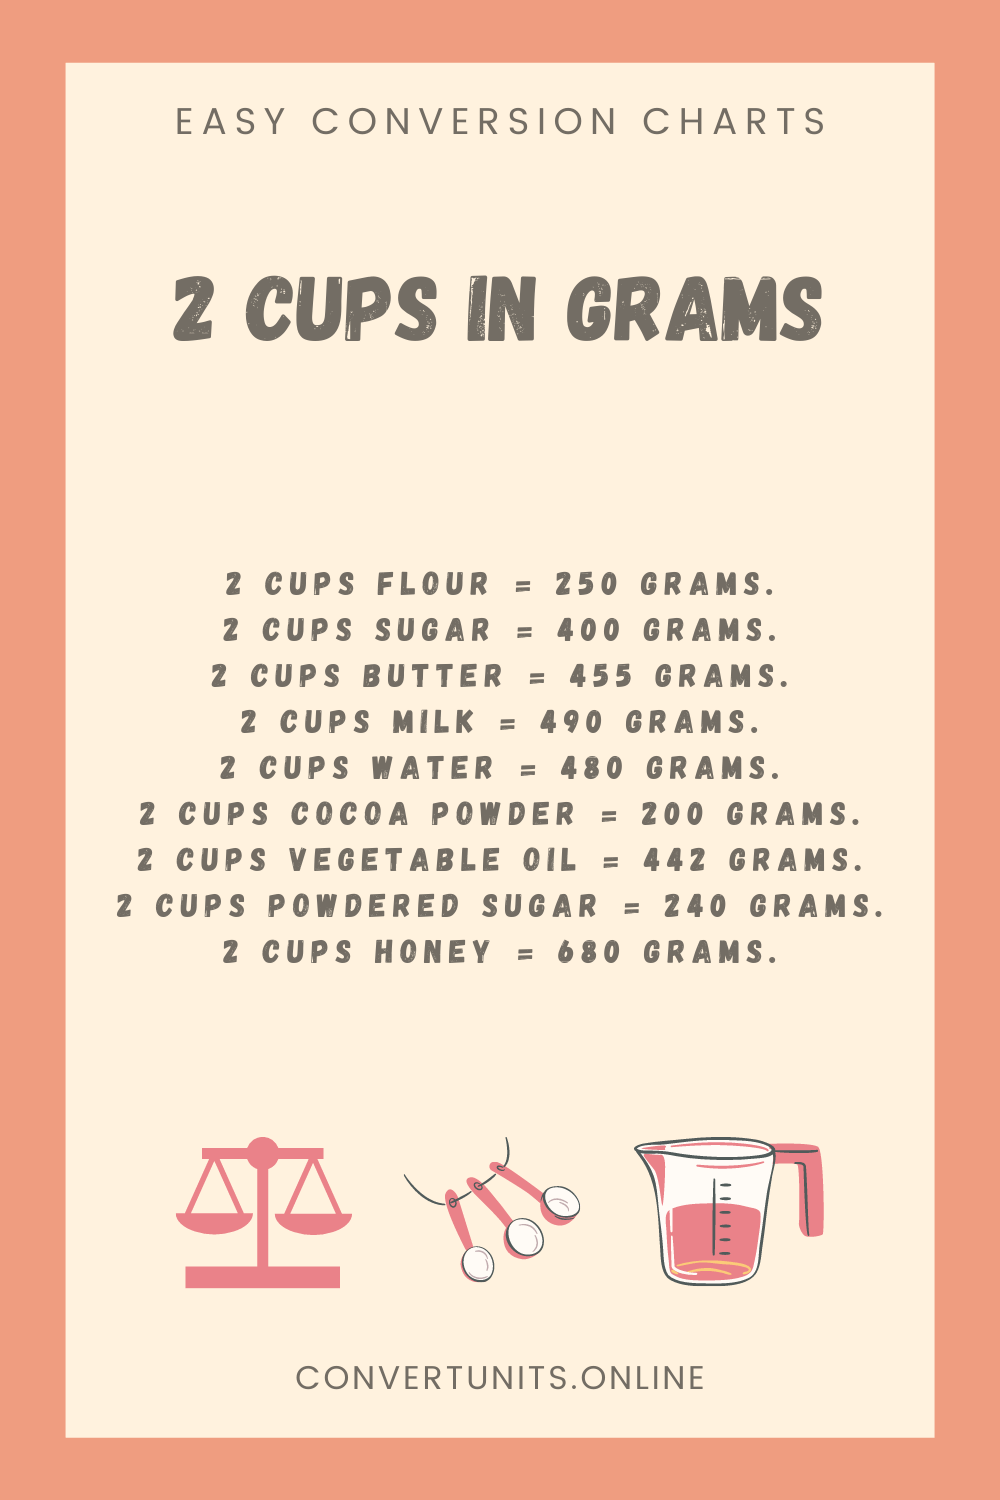 Converting Cups to Grams or Grams to Cups